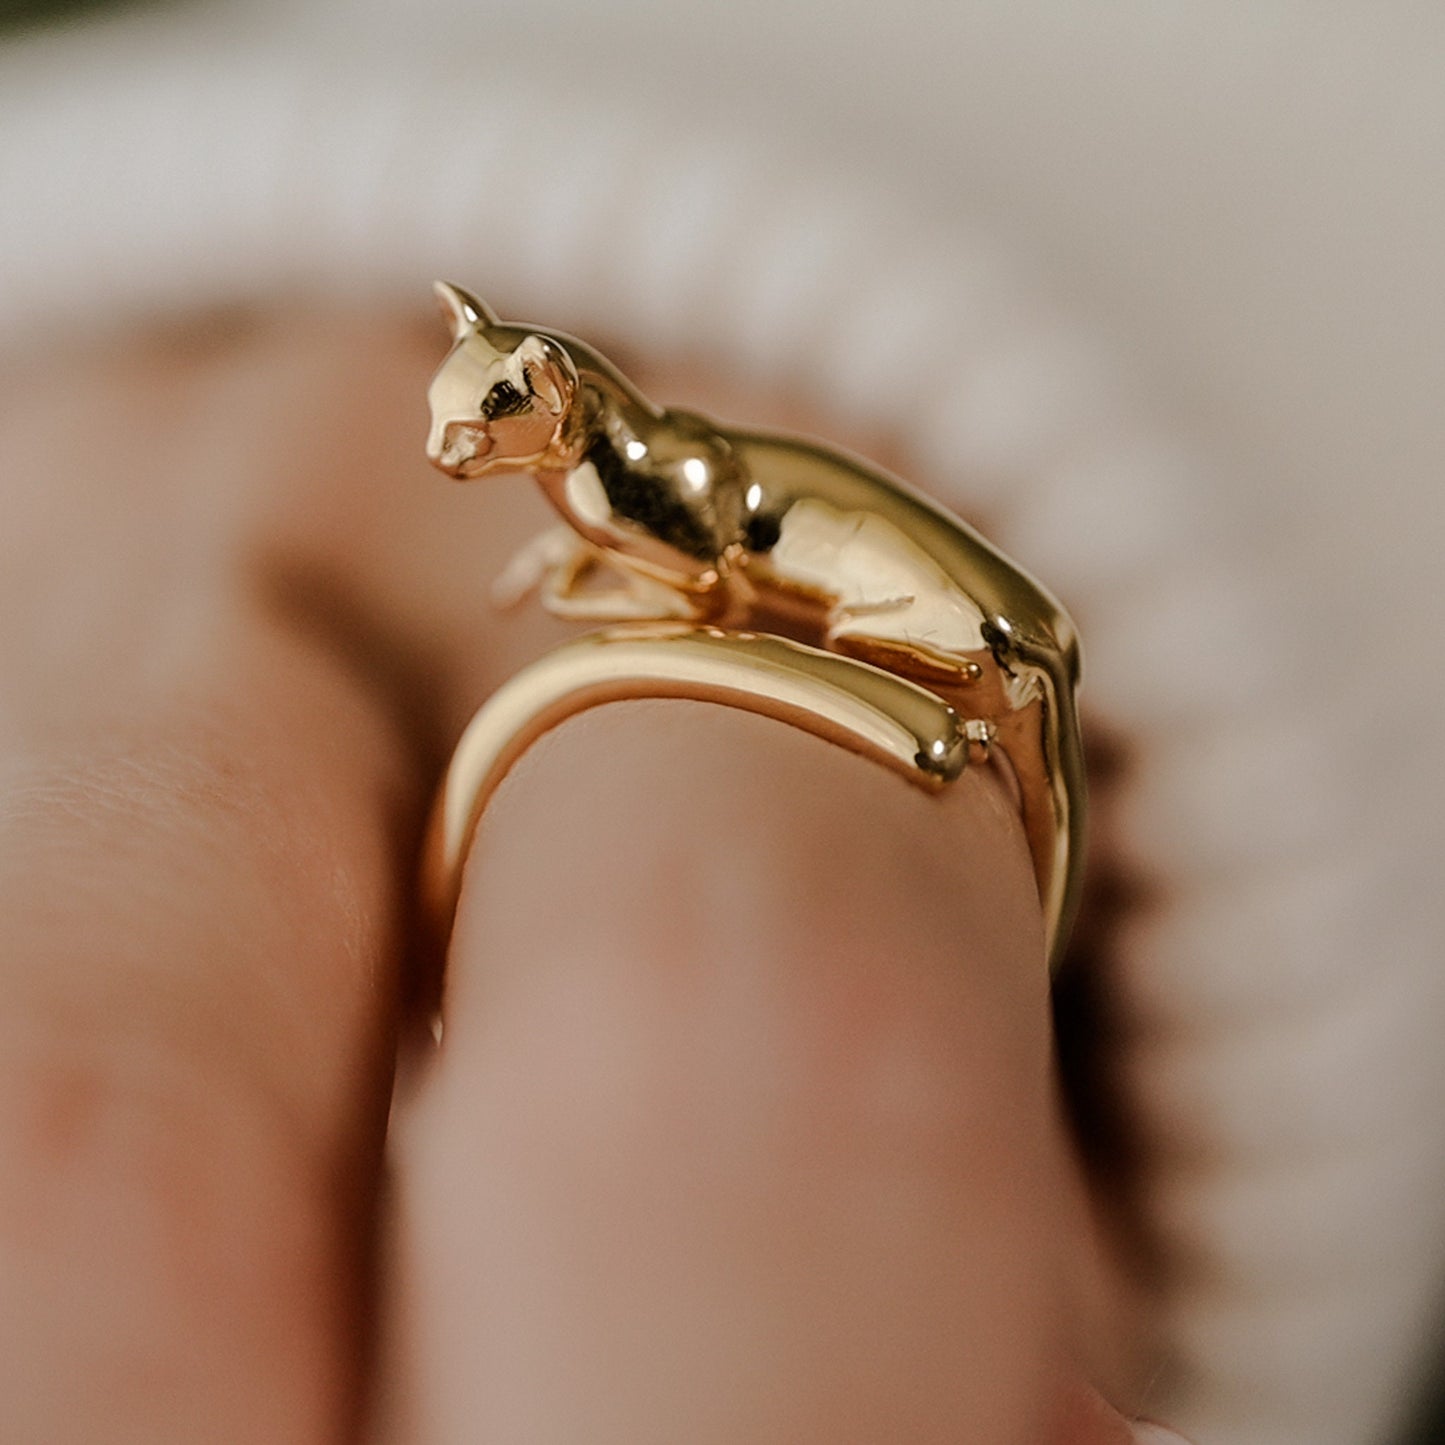 Egyptian Bastet Cat Ring in Solid Gold